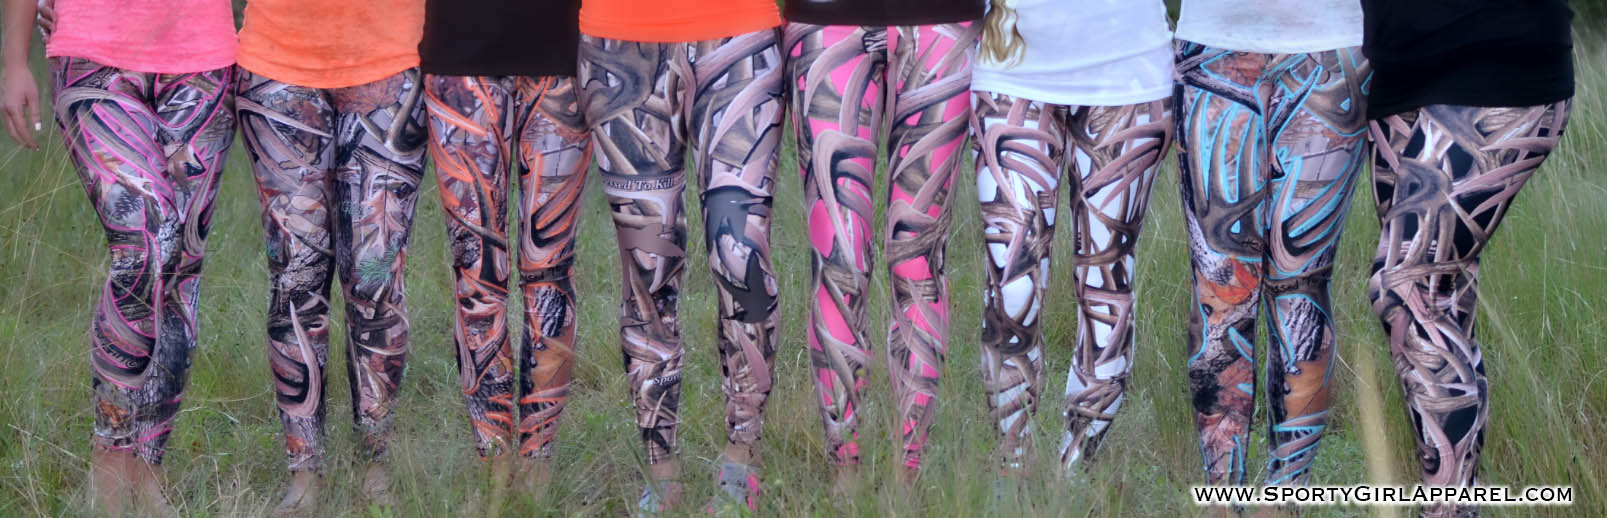 XS Leggings all 8 designs are available in leggings section